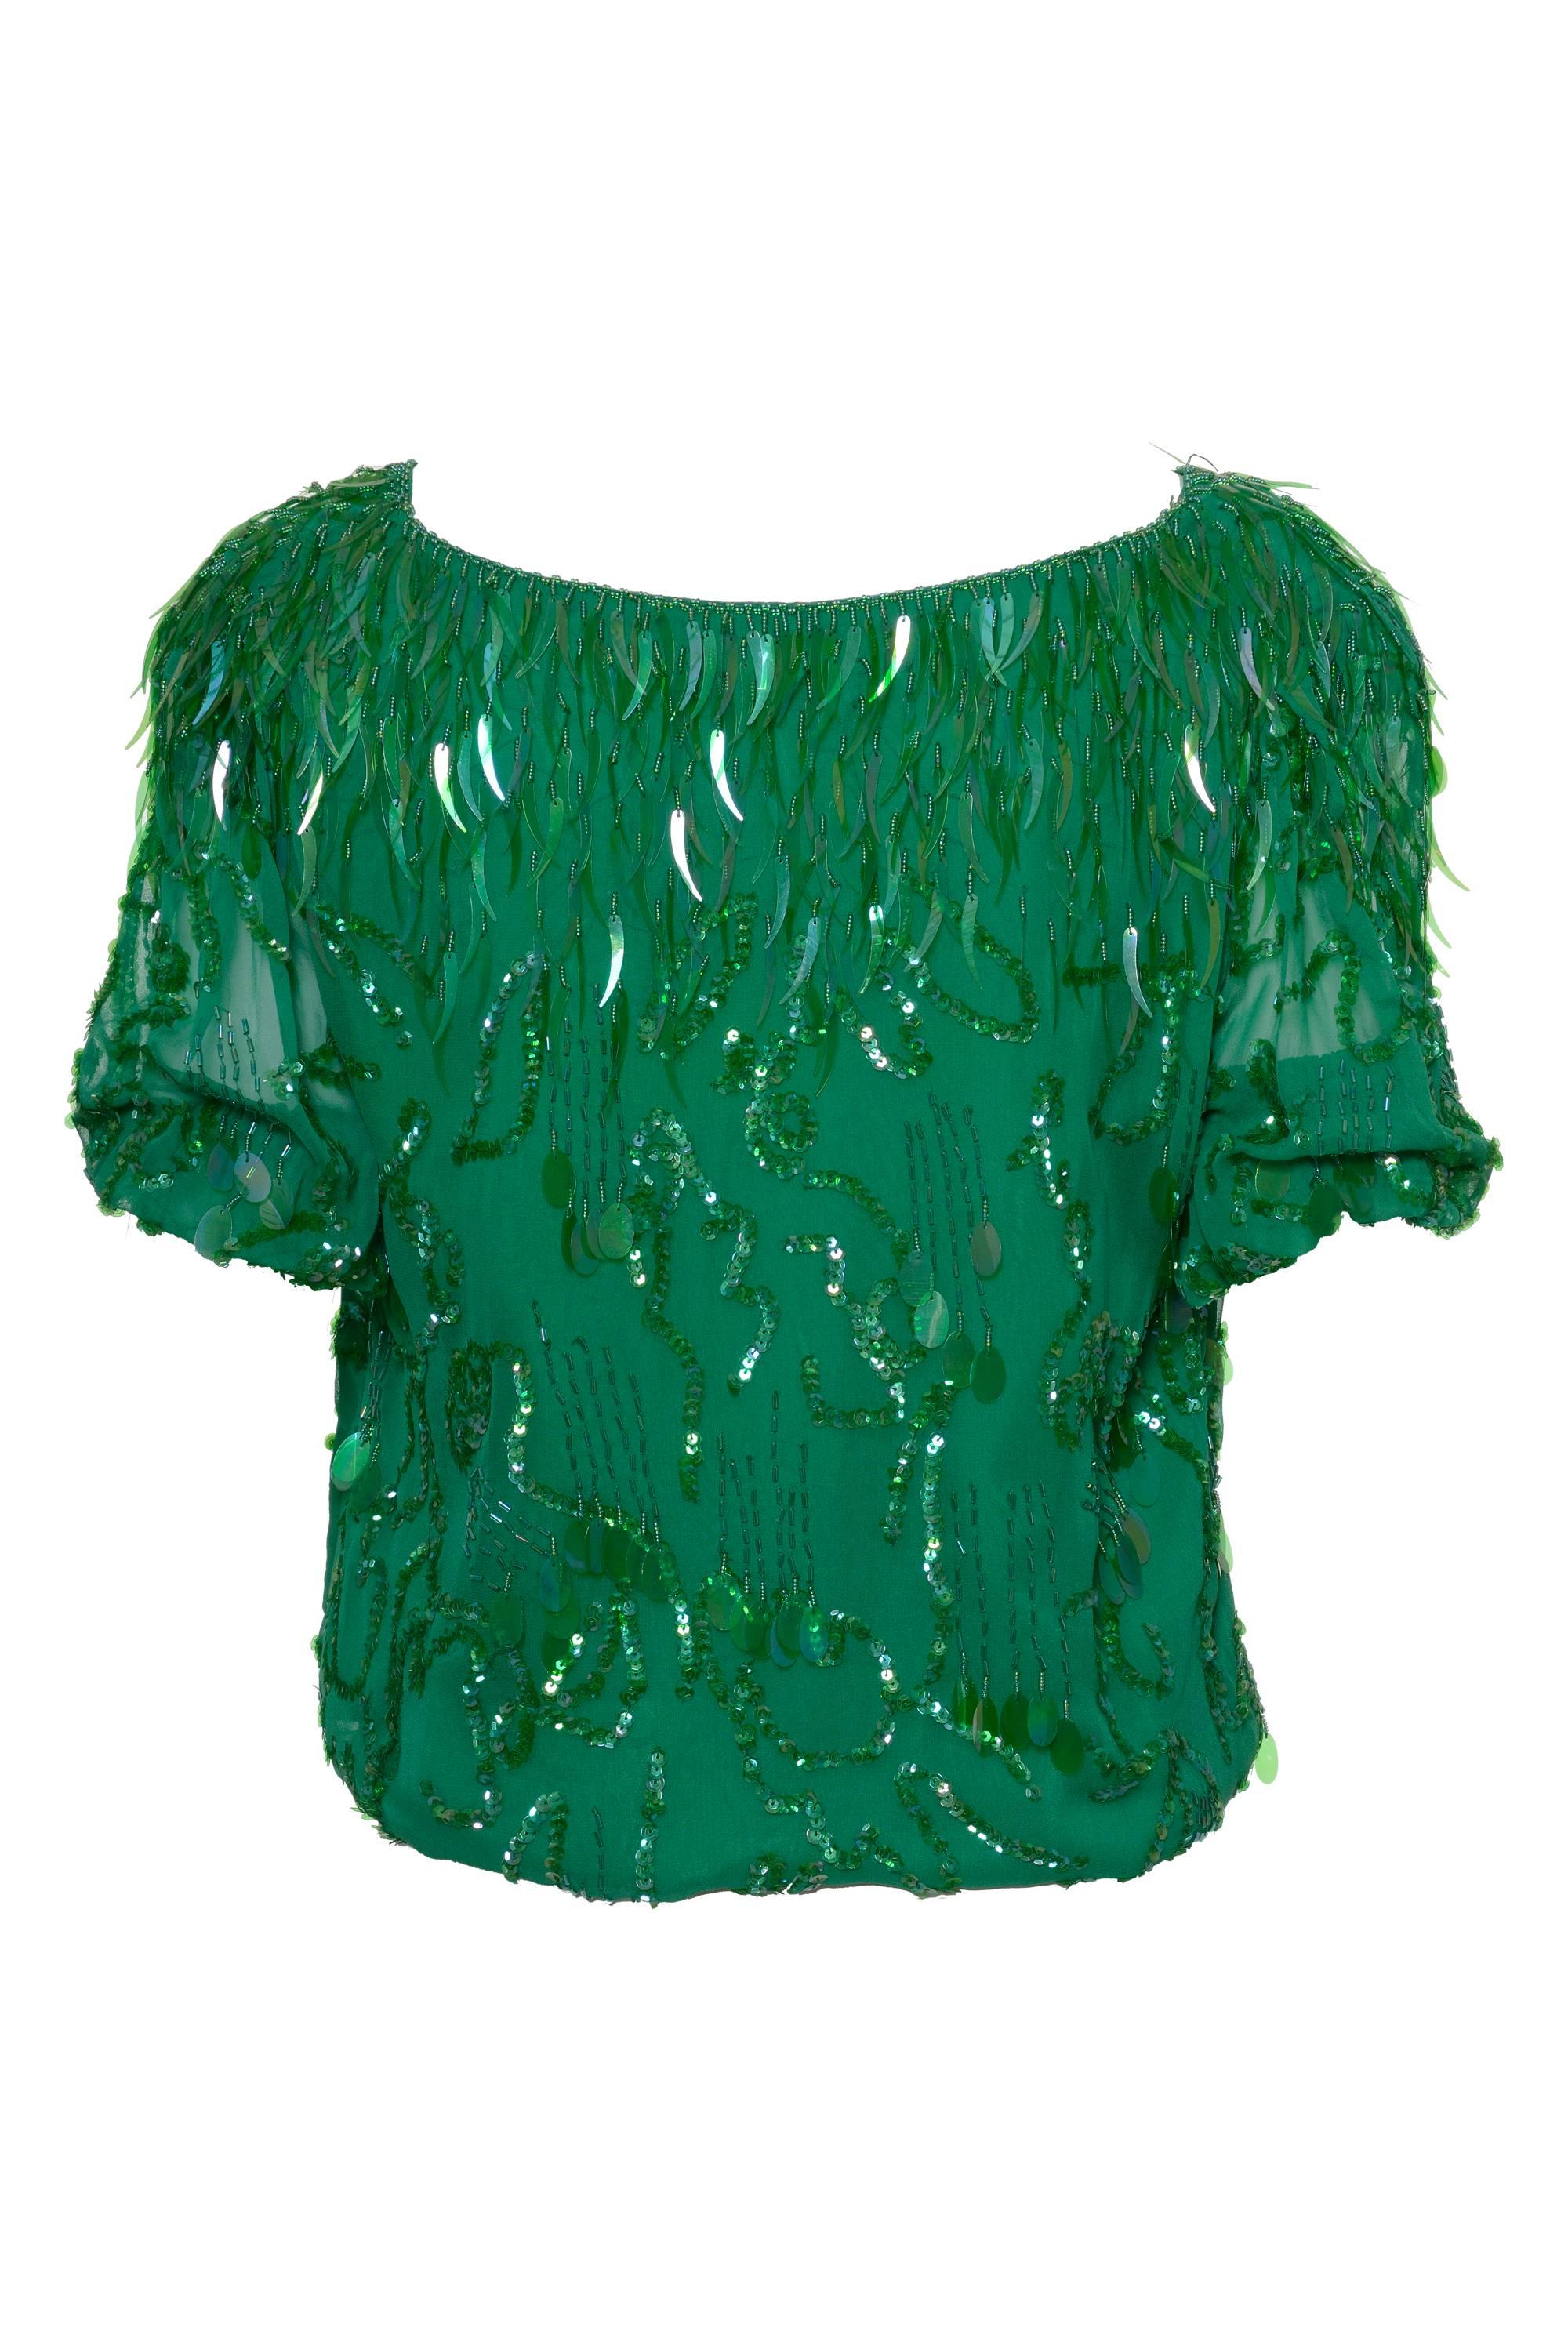 This 1980s amazing green balloon blouse by OLEG CASSINI has been fully embroidered by hand using fantasy seed and bugle beads, cup and flat sequins, V-neckline,  short balloon sleeves, pad shoulders, and gathered hems. It is made of green sheer